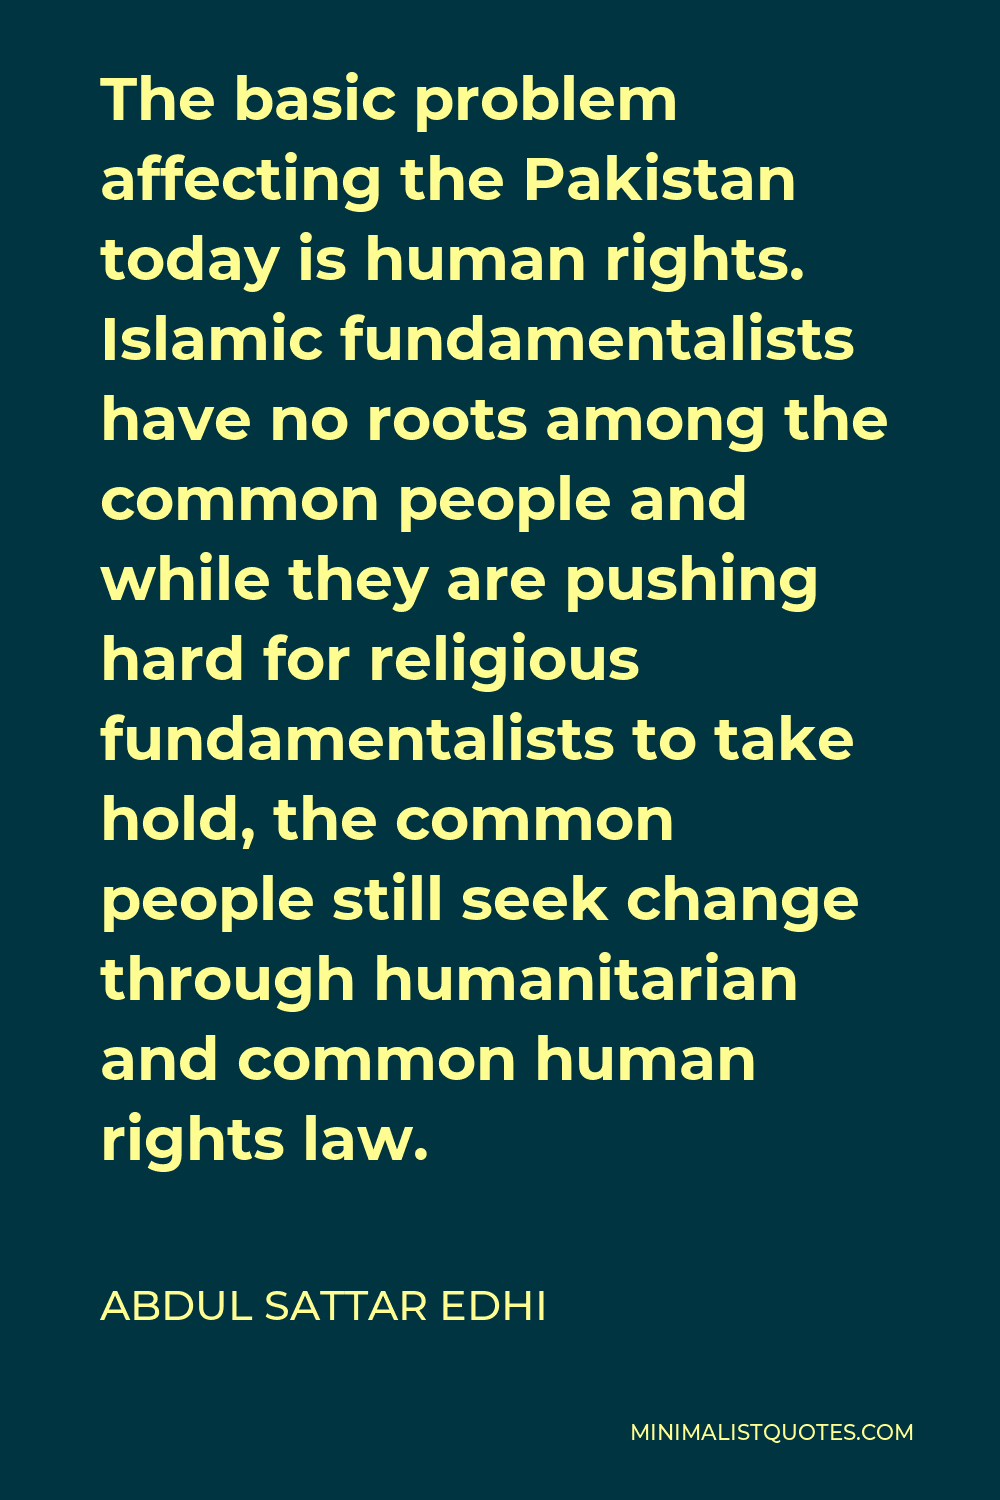 Abdul Sattar Edhi Quote - The basic problem affecting the Pakistan today is human rights. Islamic fundamentalists have no roots among the common people and while they are pushing hard for religious fundamentalists to take hold, the common people still seek change through humanitarian and common human rights law.